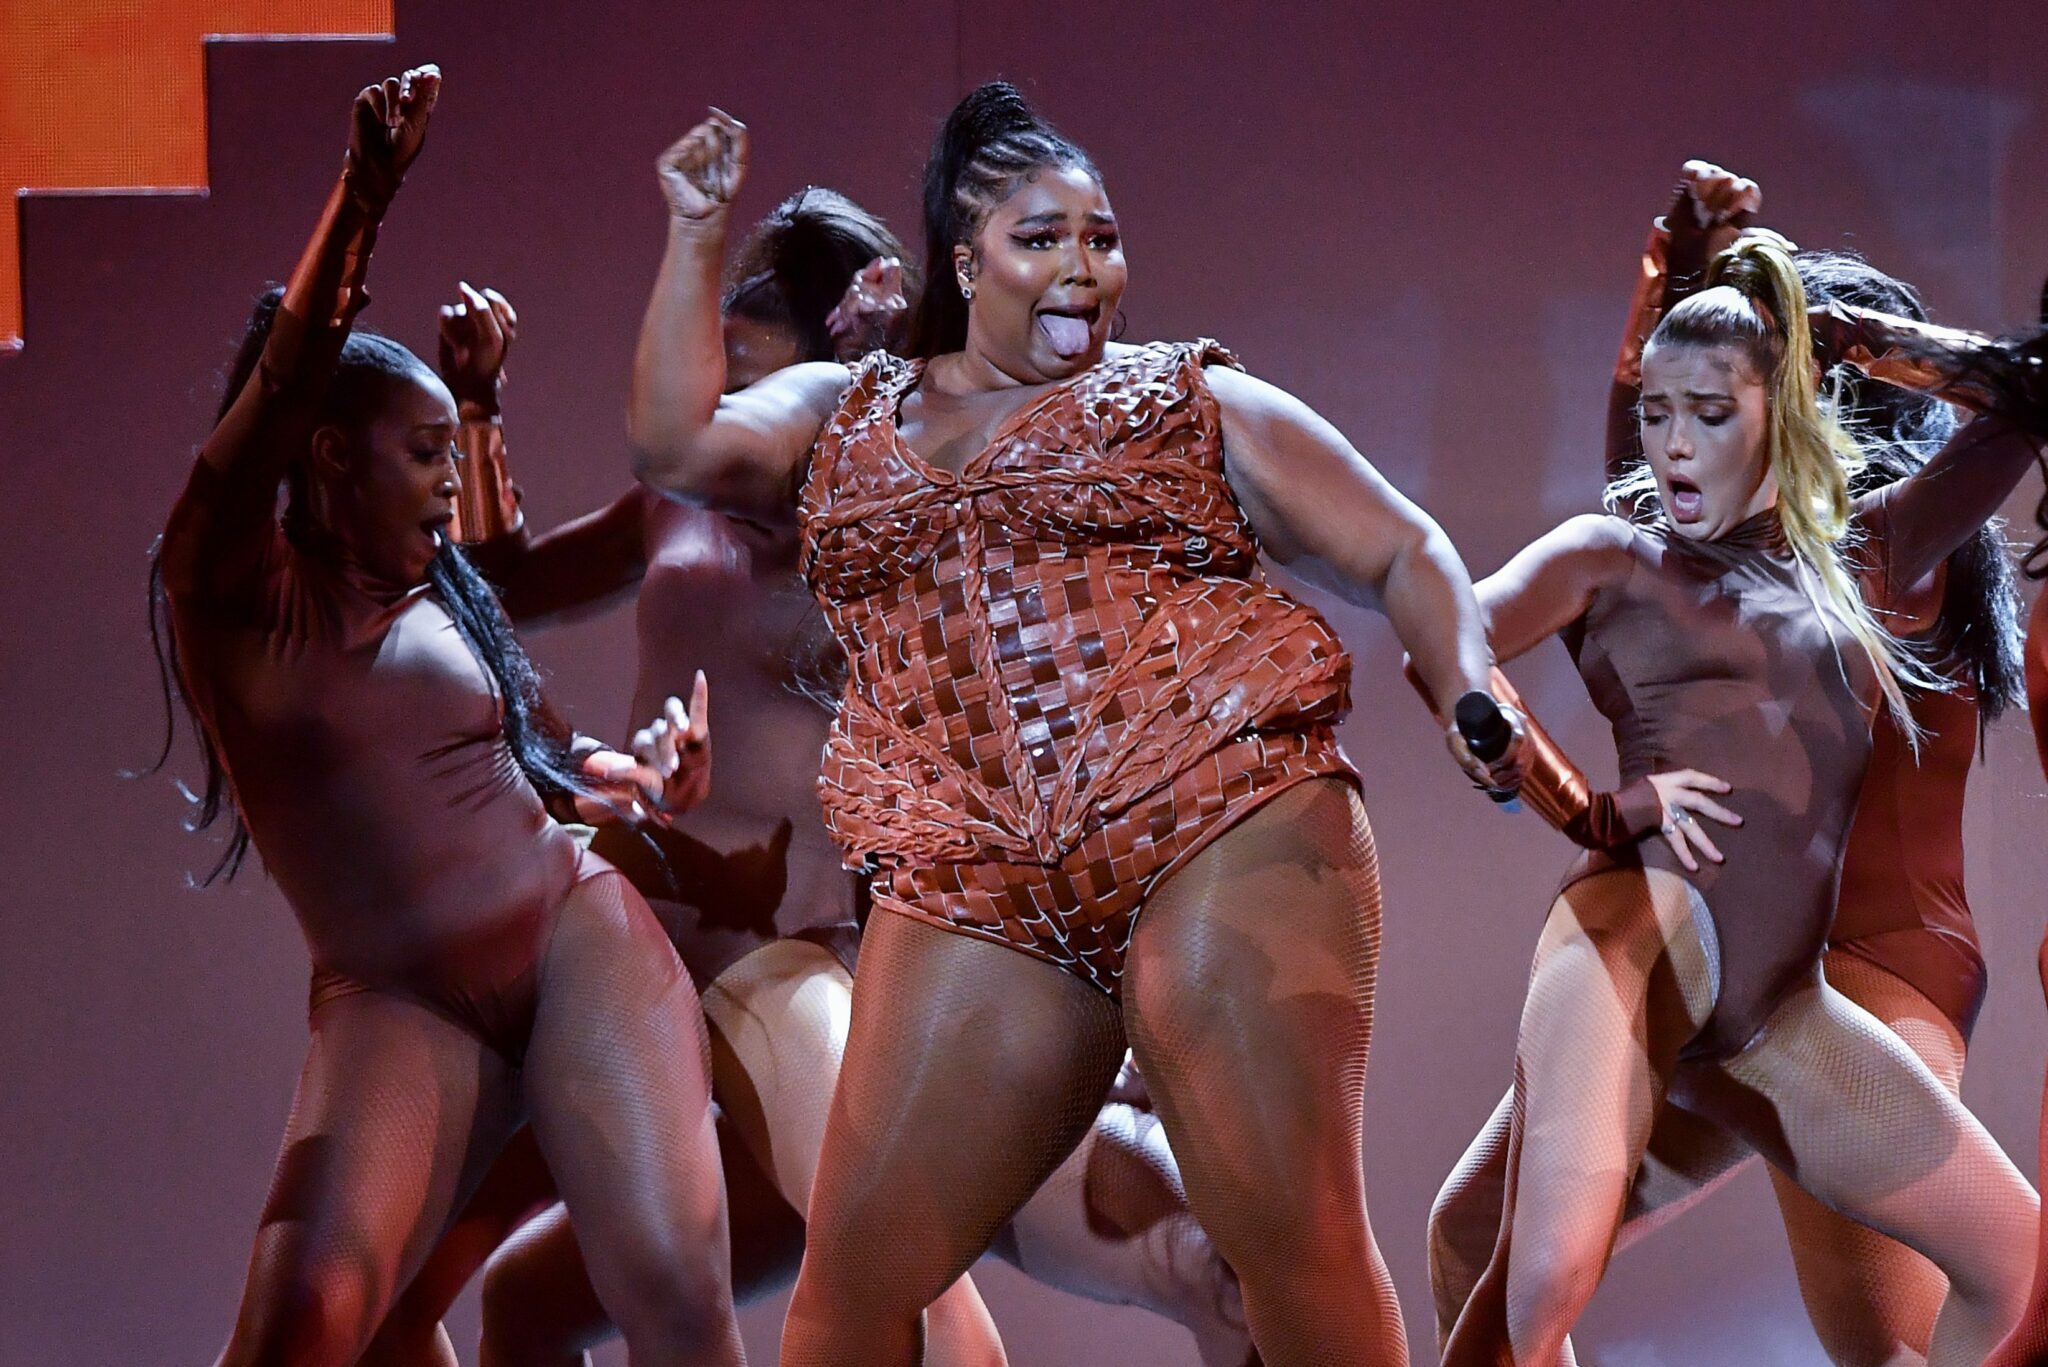 Image of Lizzo performing at the Brits with backing dancers